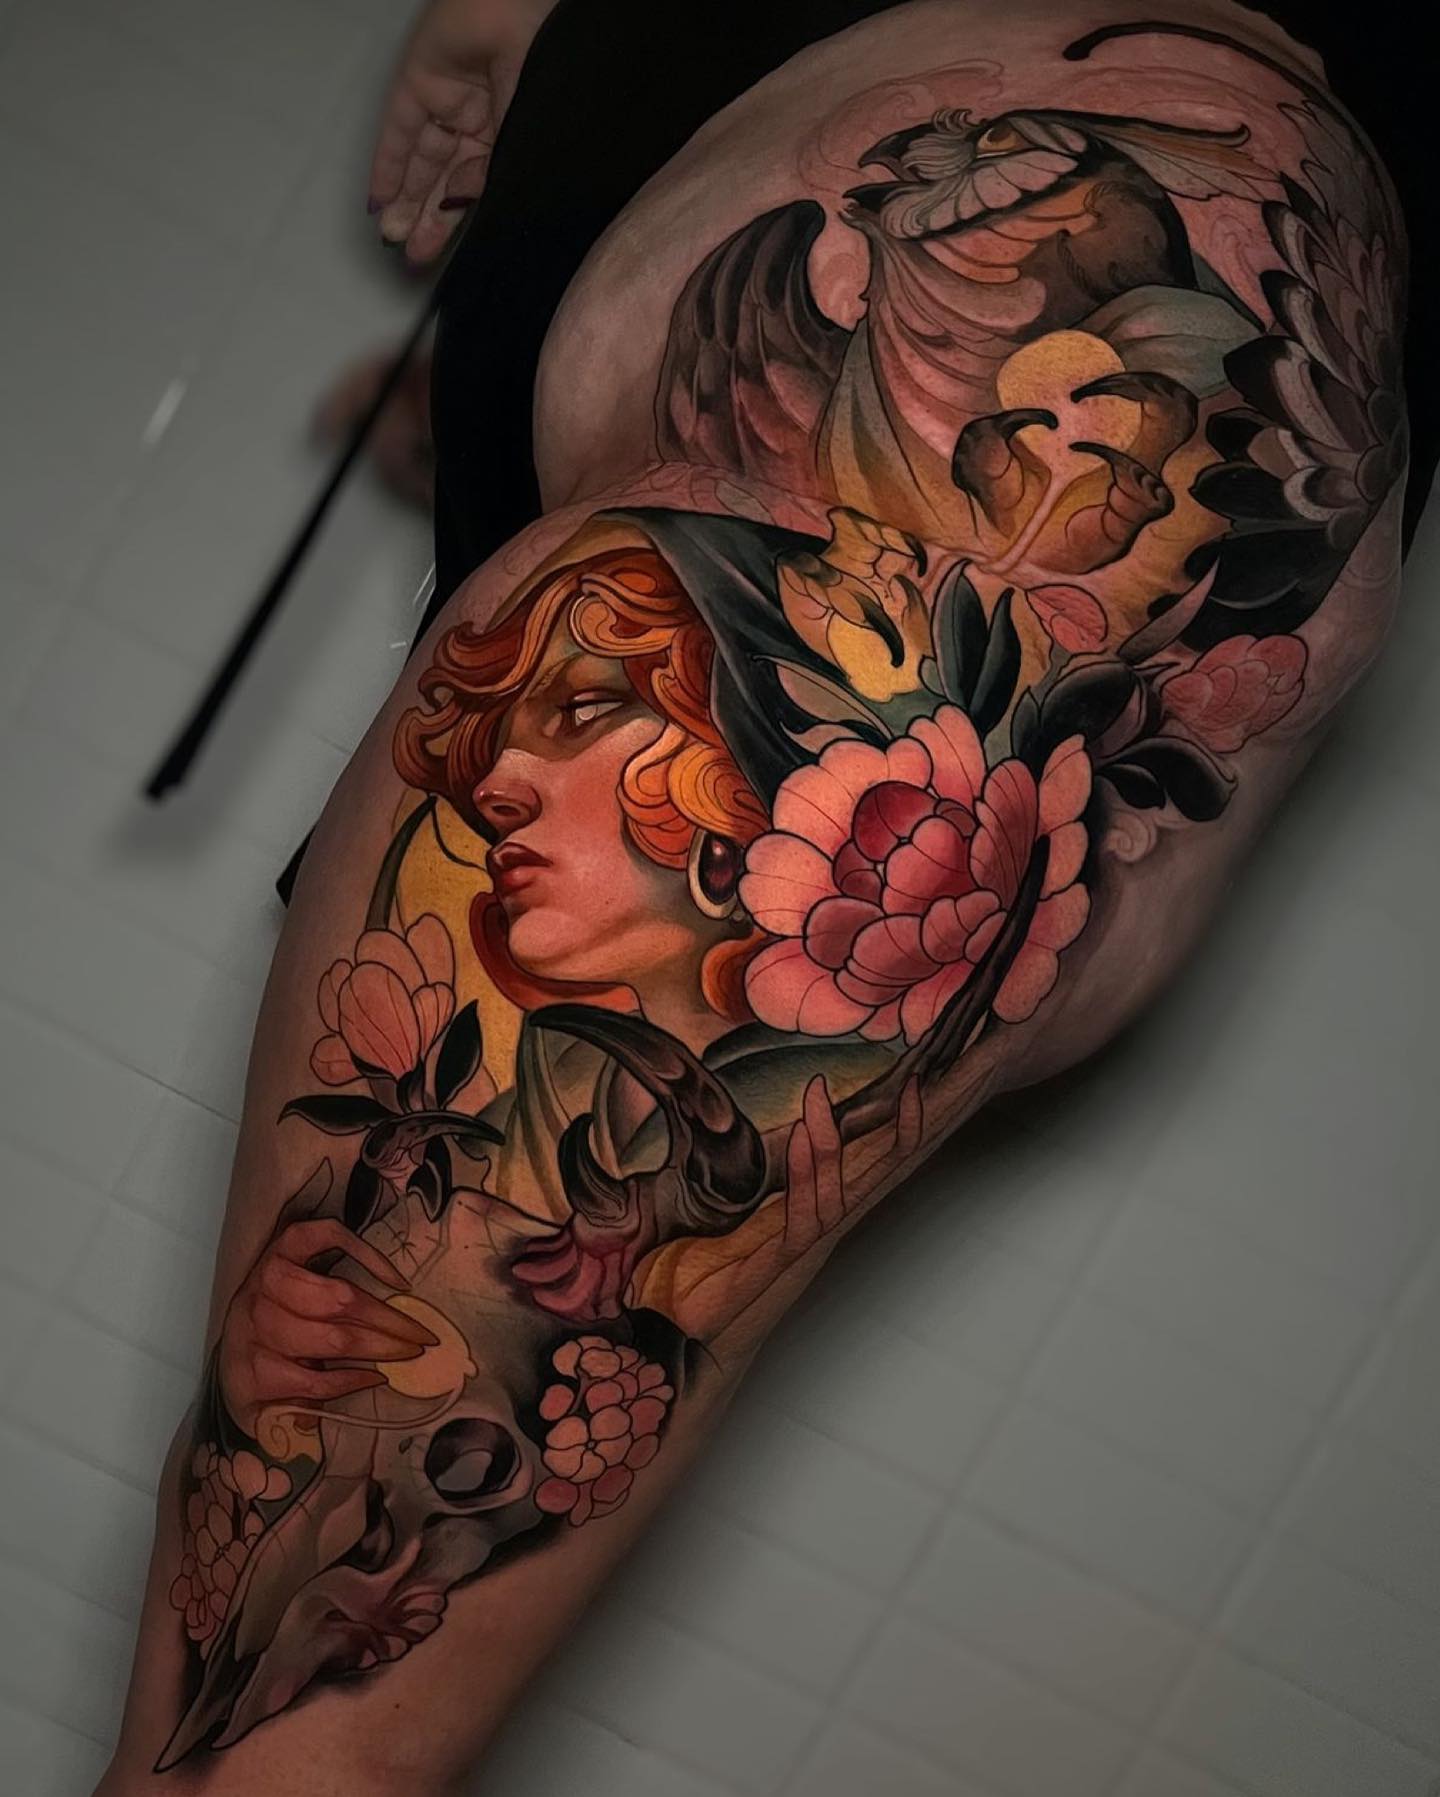 Intricate Full Sleeve Tattoo with Vintage Portrait and Floral Elements